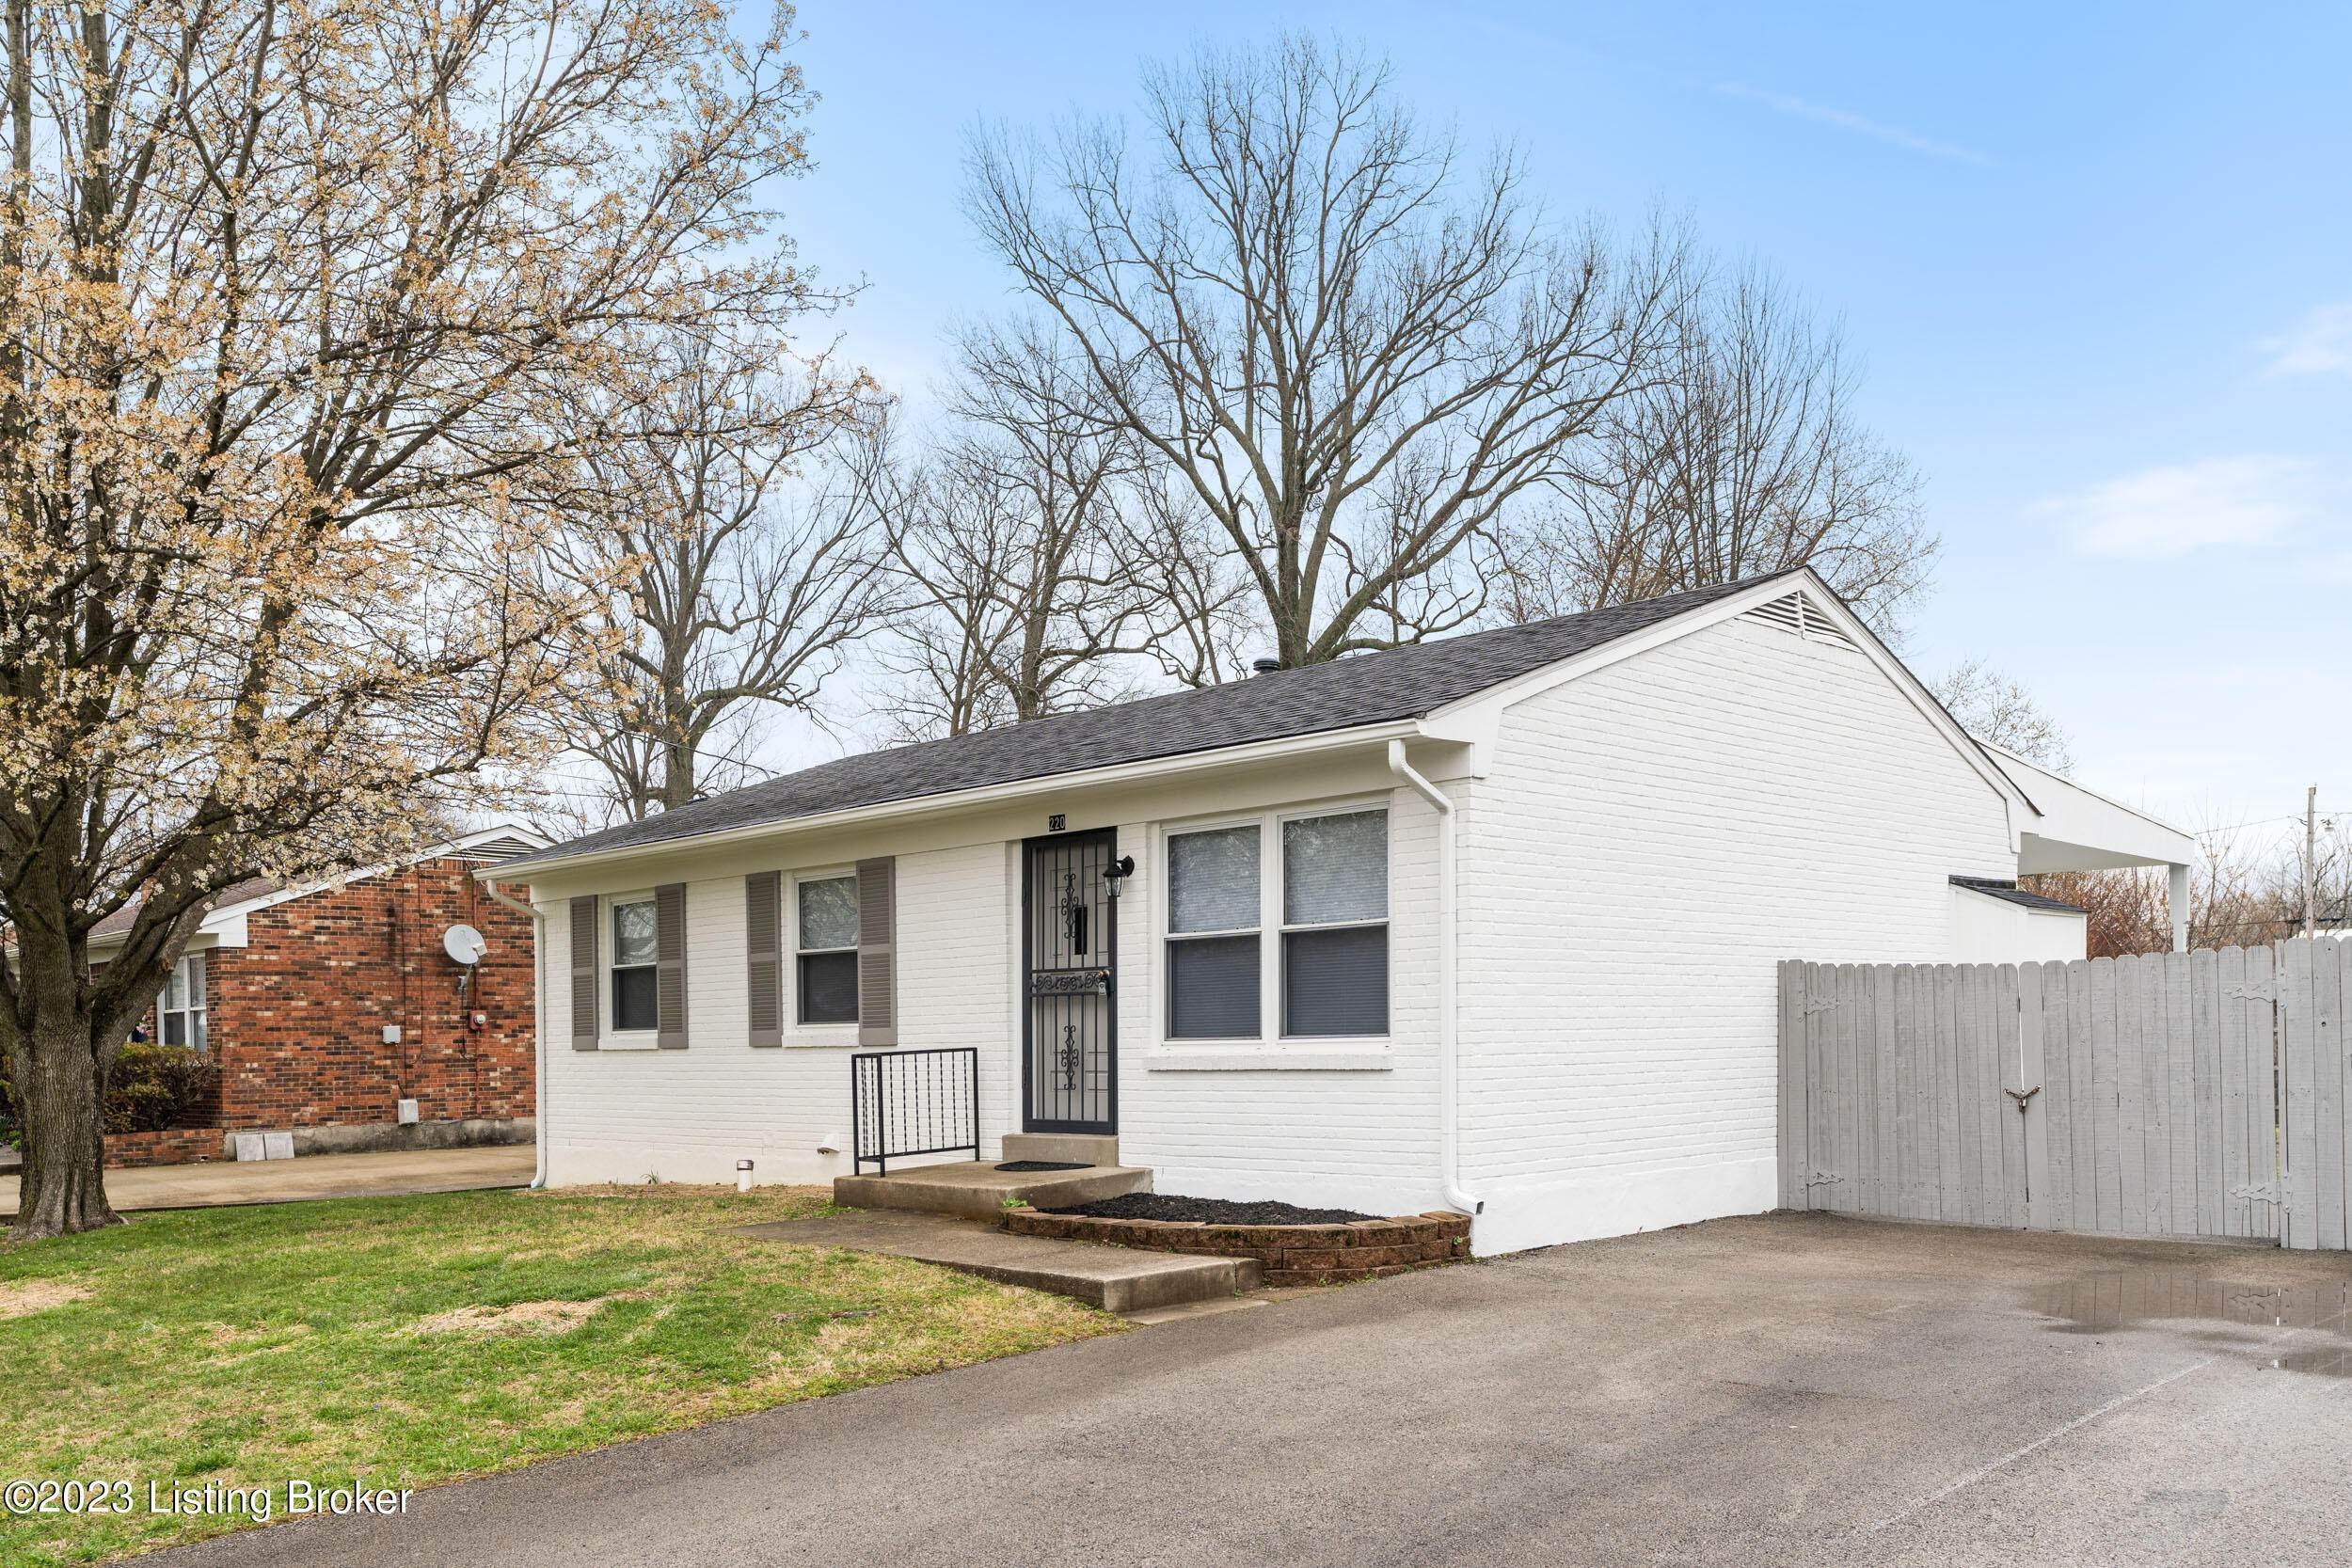 2. Single Family at Louisville, KY 40229